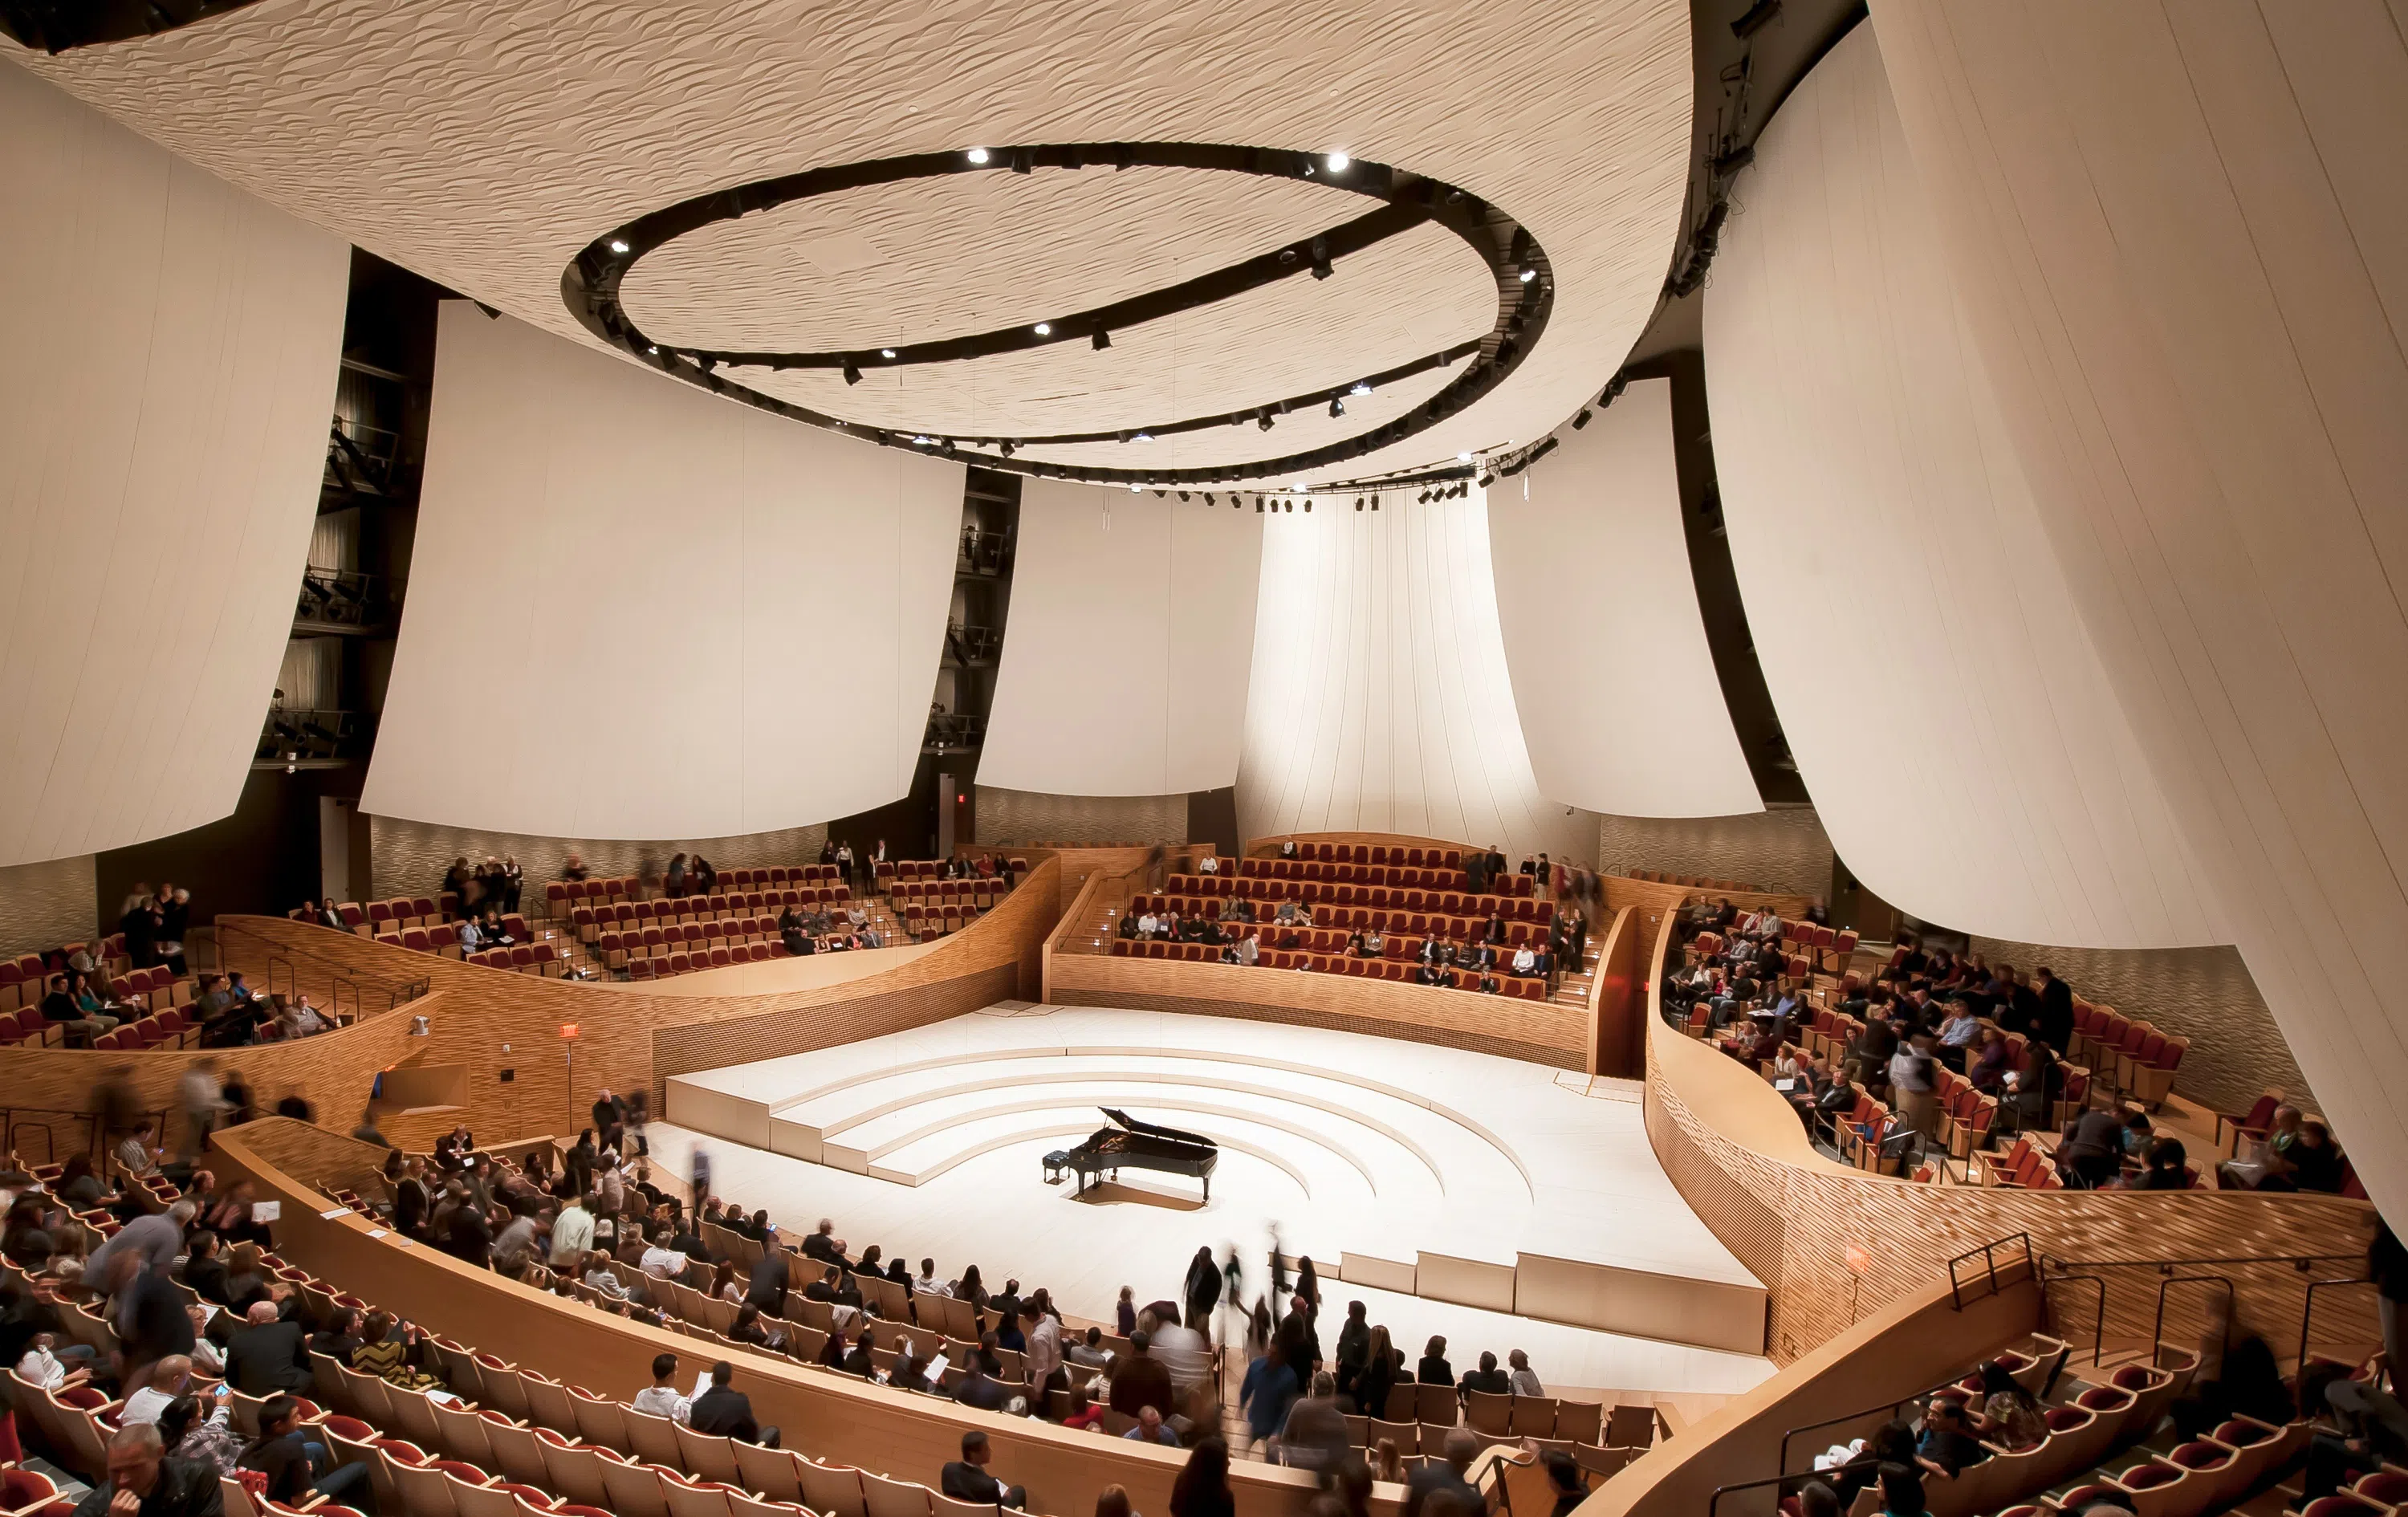 Interior of concert hall with piano set in the middle of a large round seating area beneath several large sound baffles